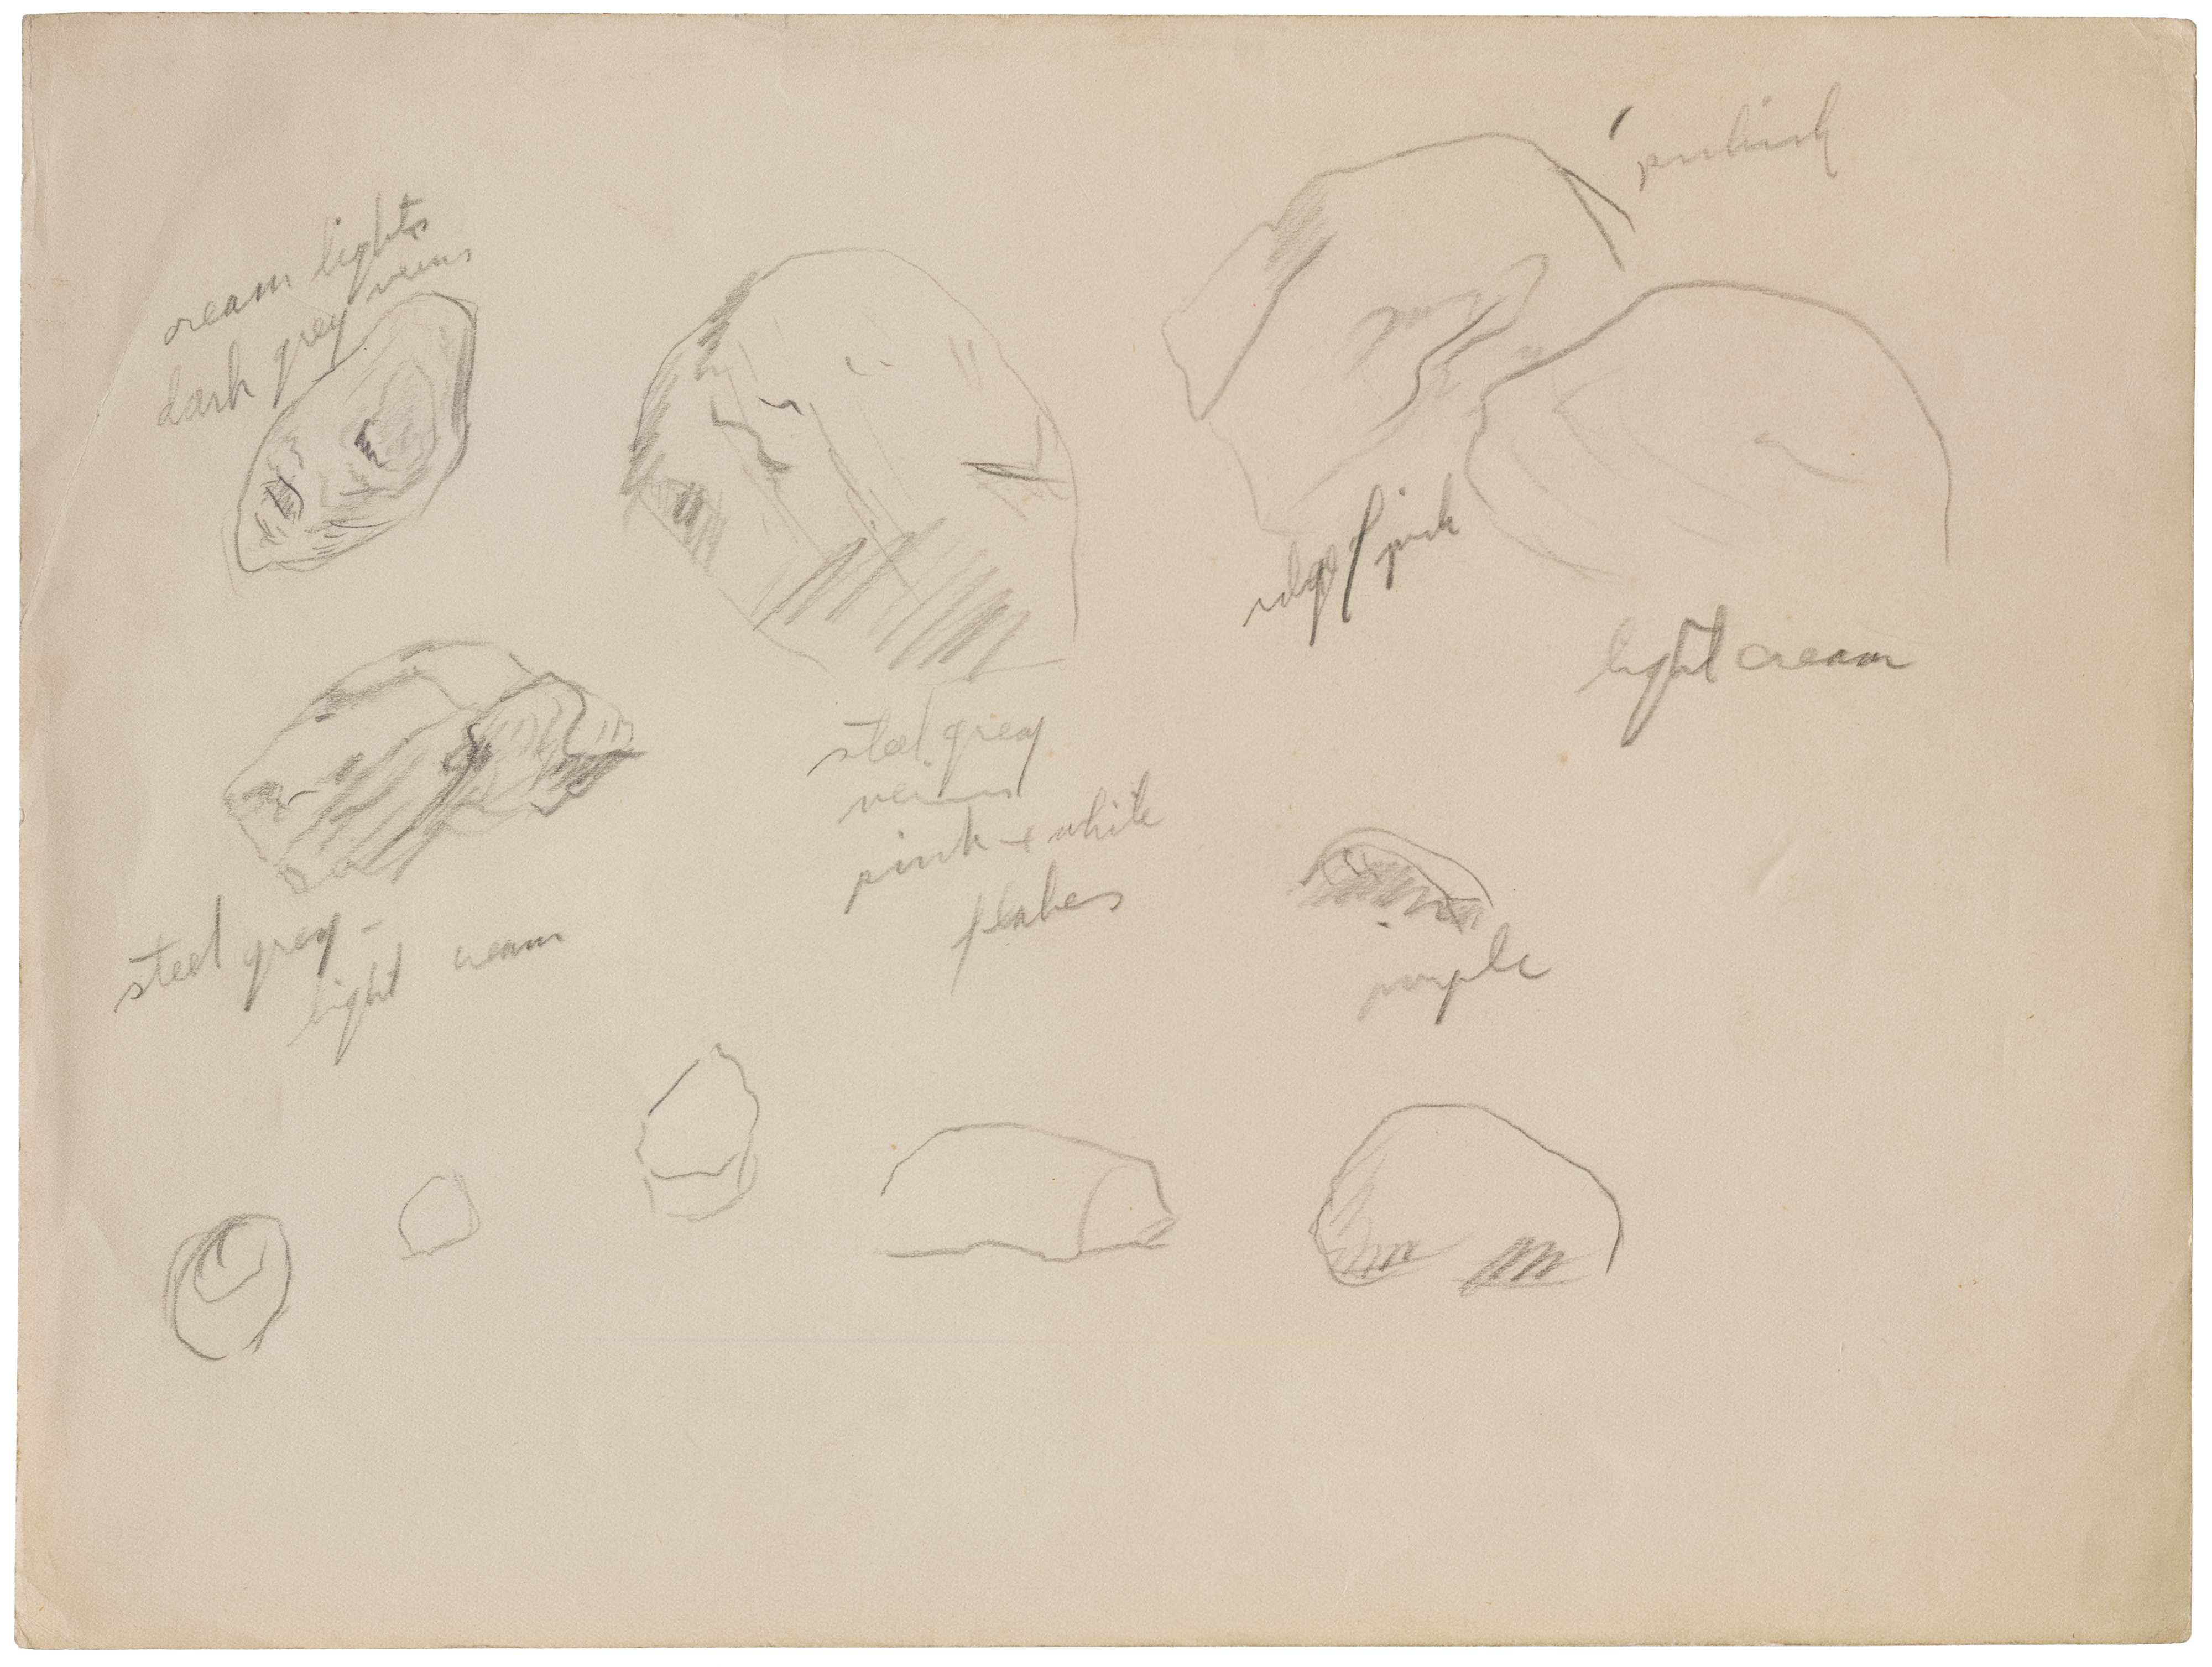 Clyfford Still, PDX-90, undated. Graphite on paper, 10 ½ x 8 inches (26.7 x 20.3 cm) Clyfford Still Museum © City and County of Denver / ARS, NY